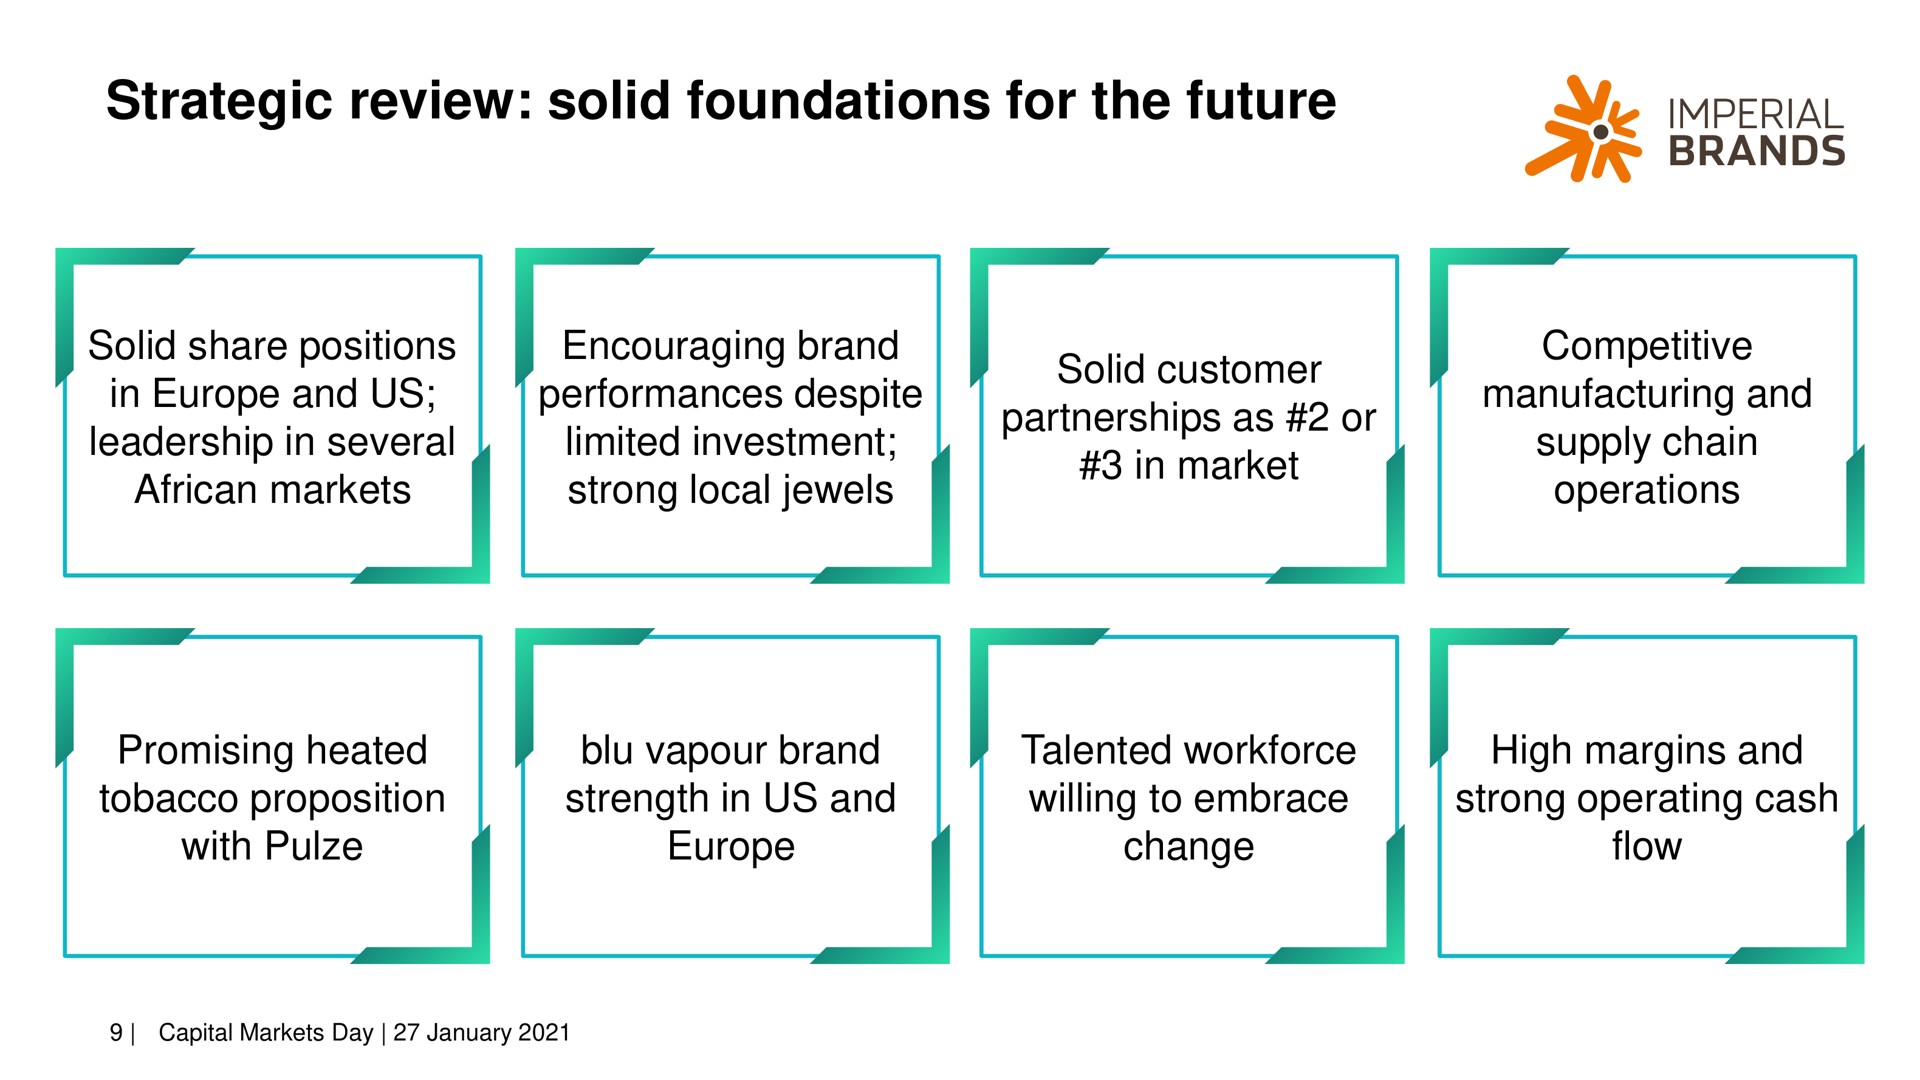 strategic review solid foundations for the future imperial brands | Imperial Brands